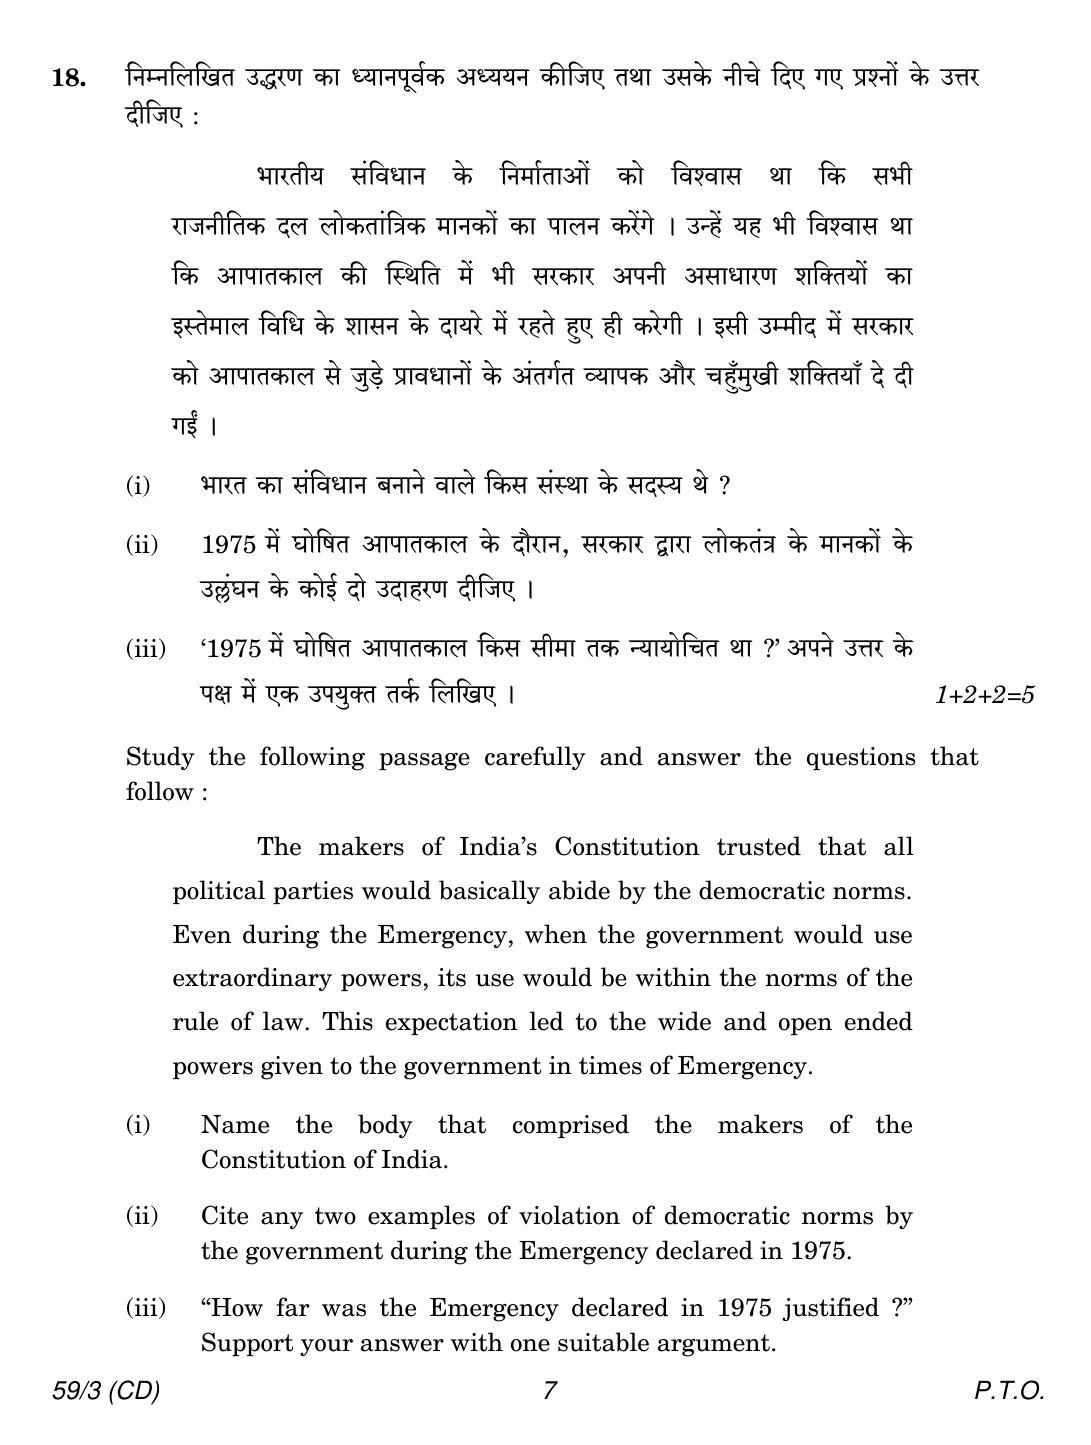 CBSE Class 12 59-3 POLITICAL SCIENCE CD 2018 Question Paper - Page 7